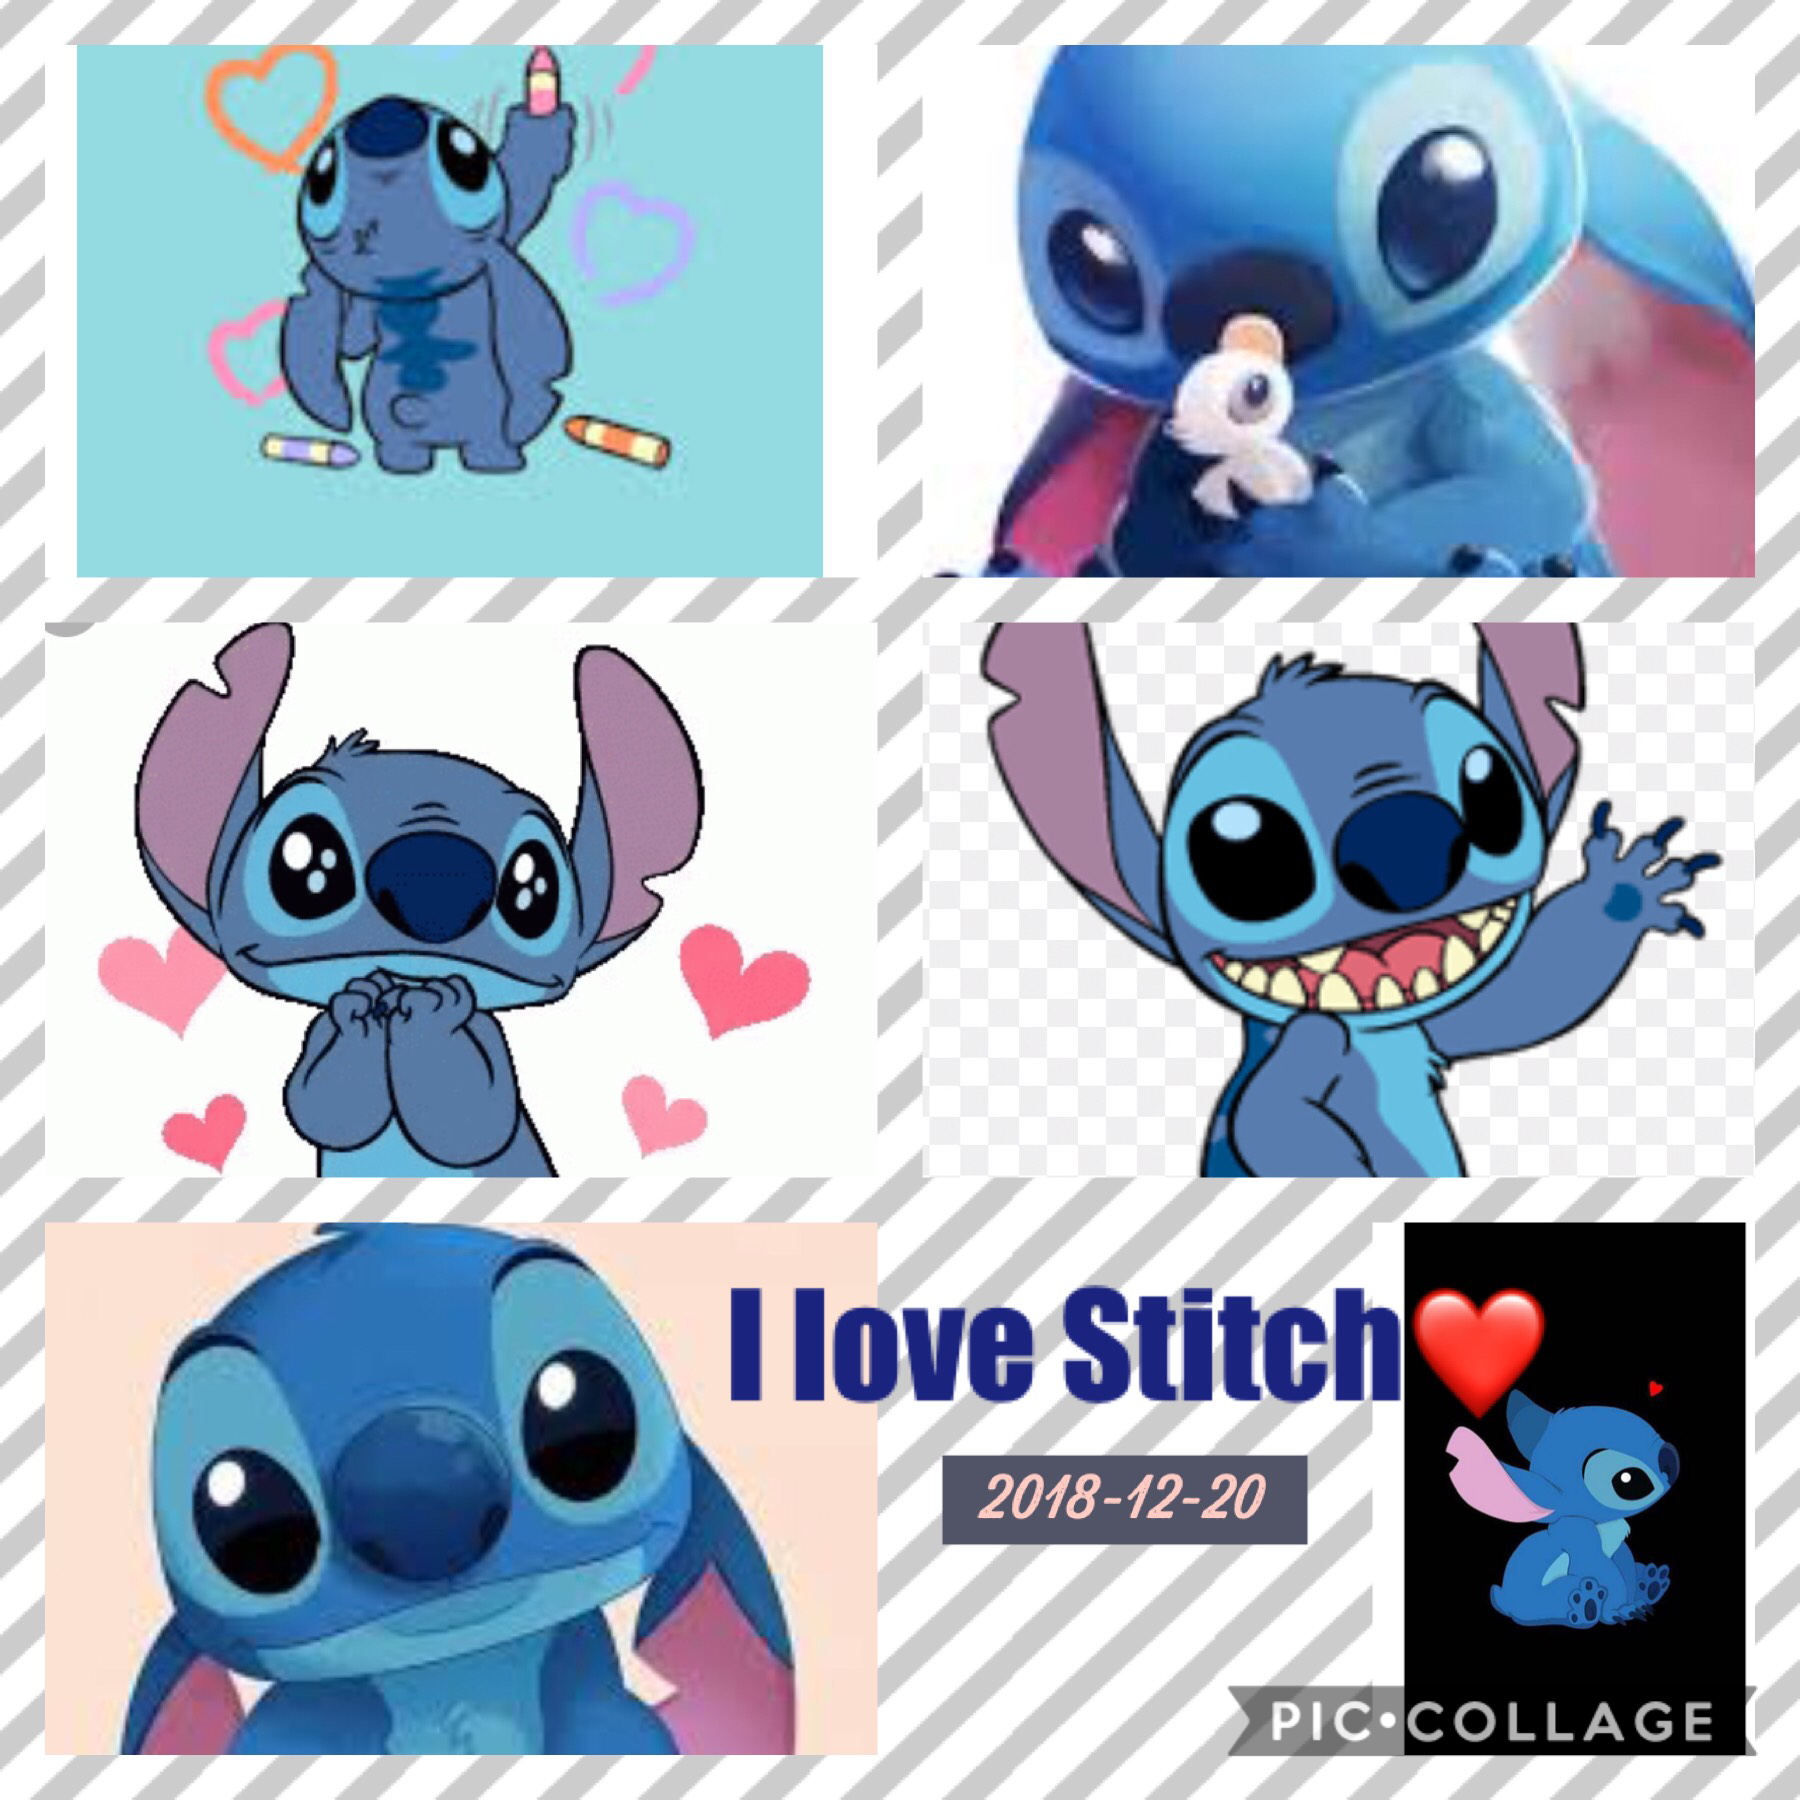 I love Stitch.❤️ What is your favorites Disney character??